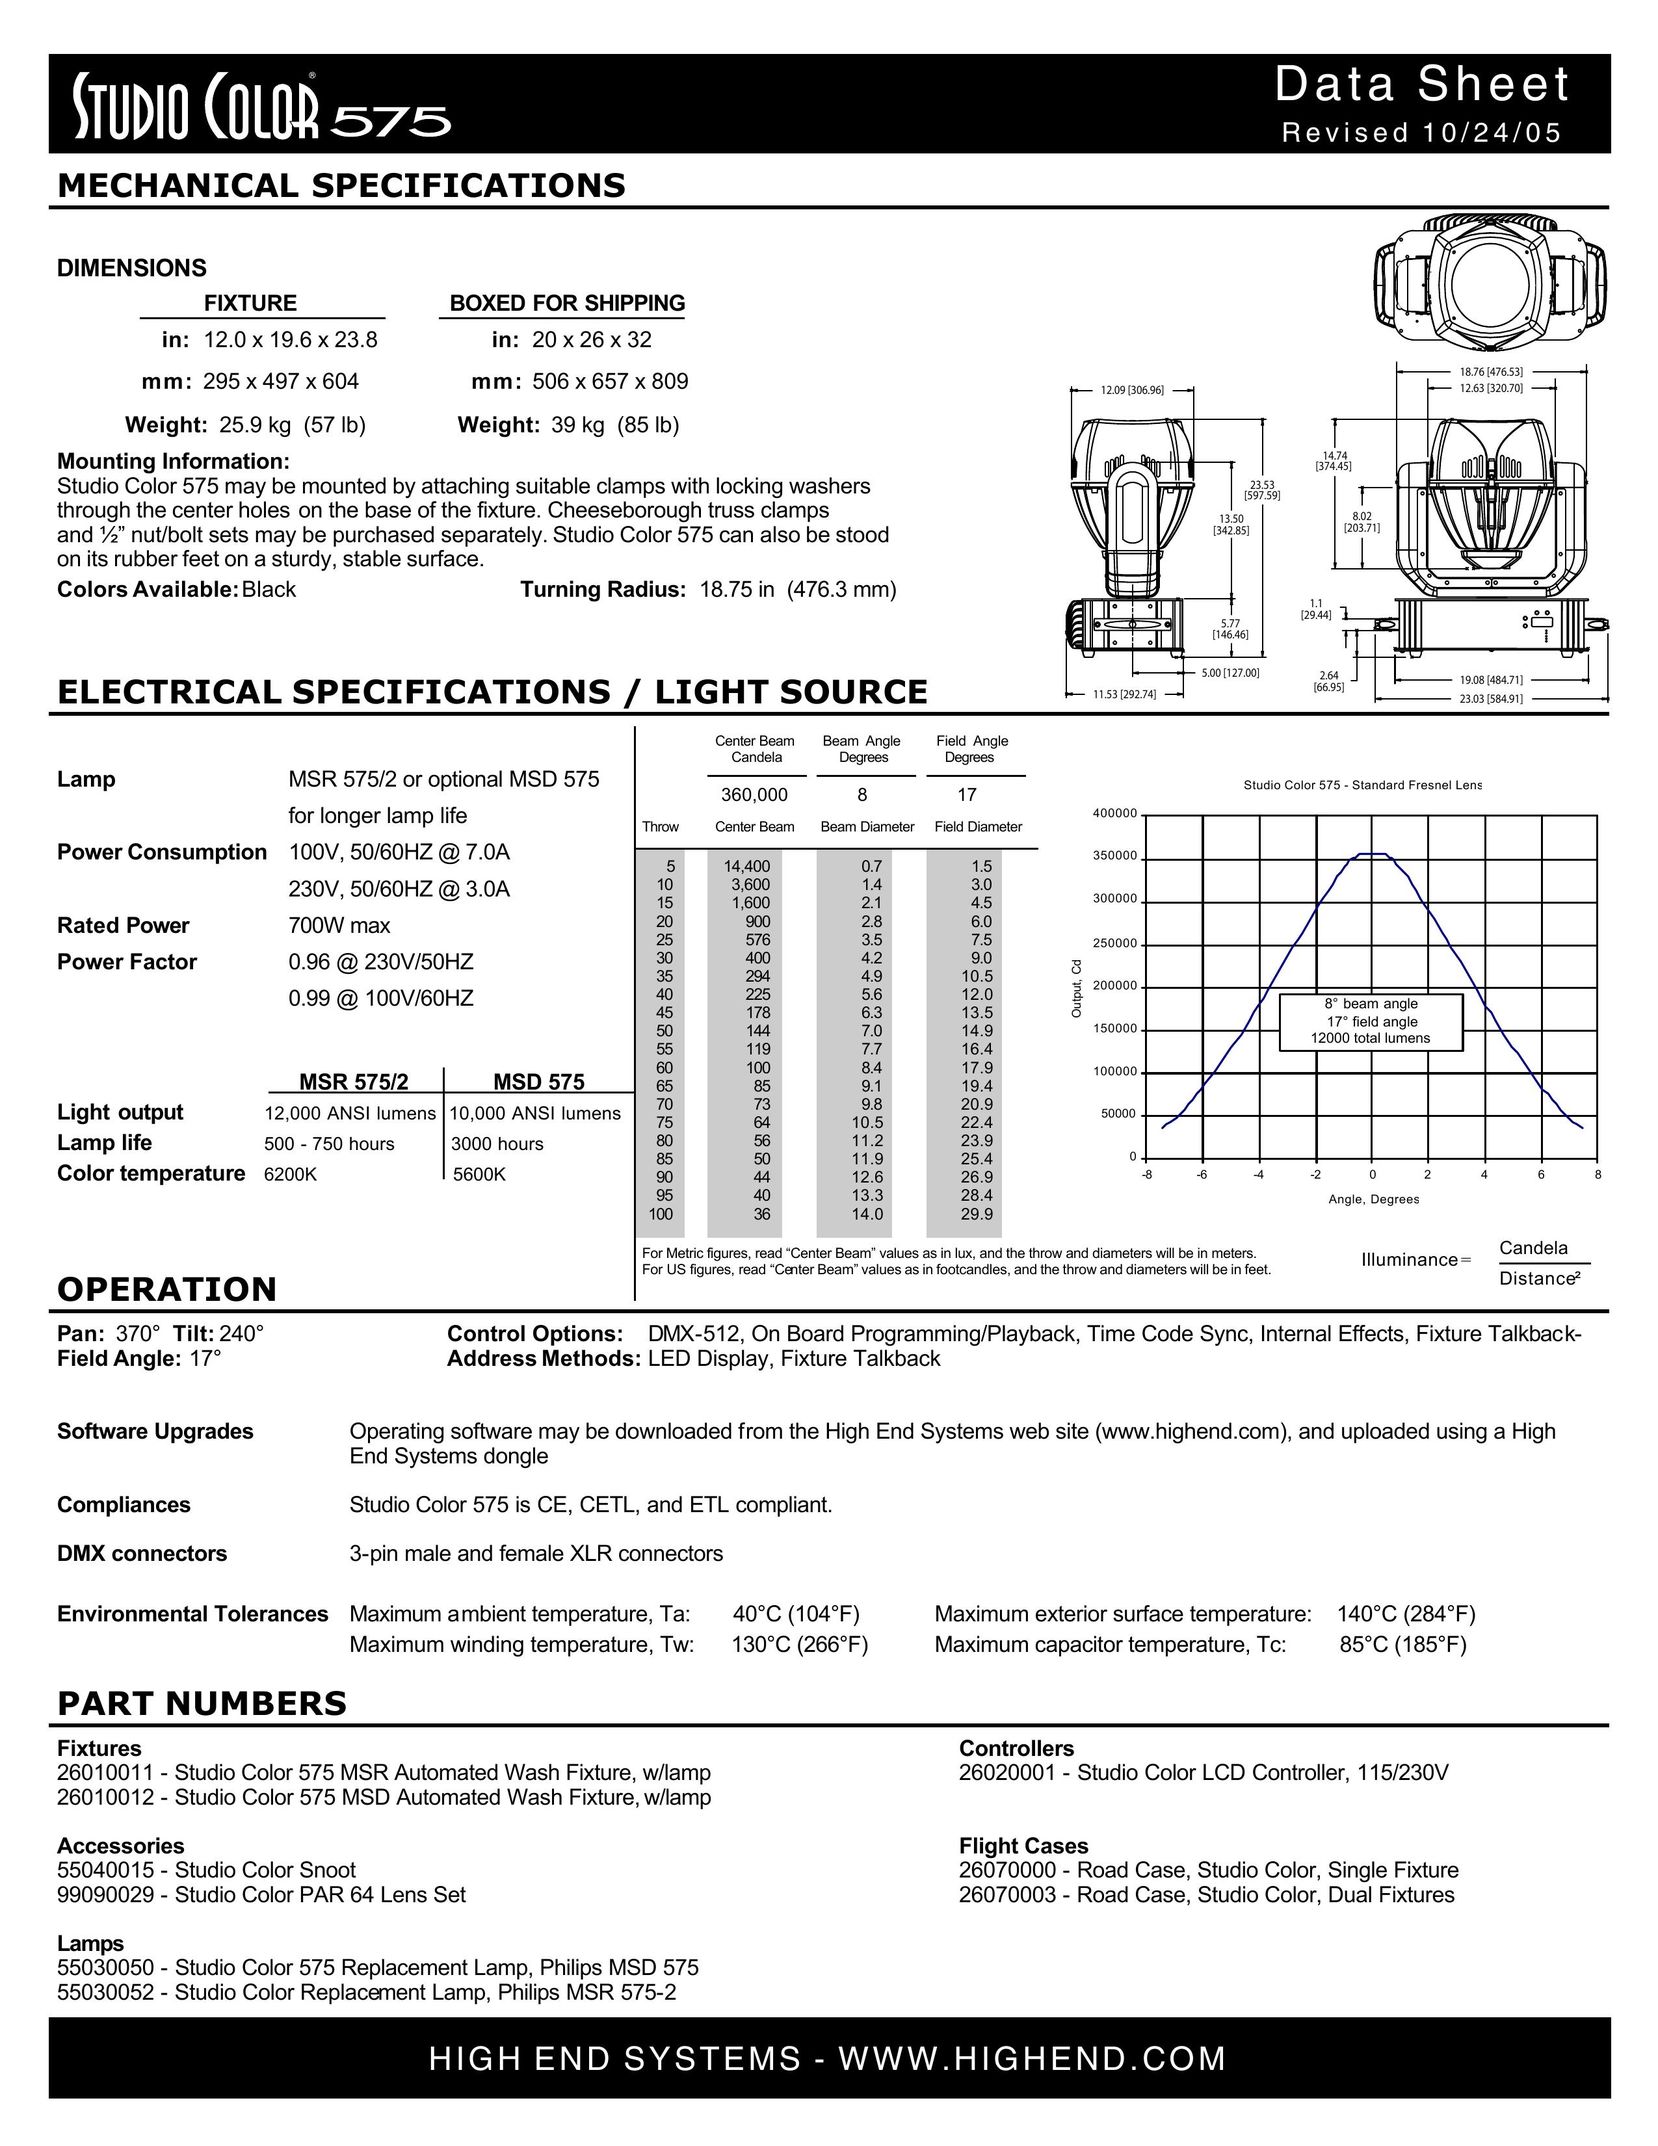 High End Systems MSR 575/2 Indoor Furnishings User Manual